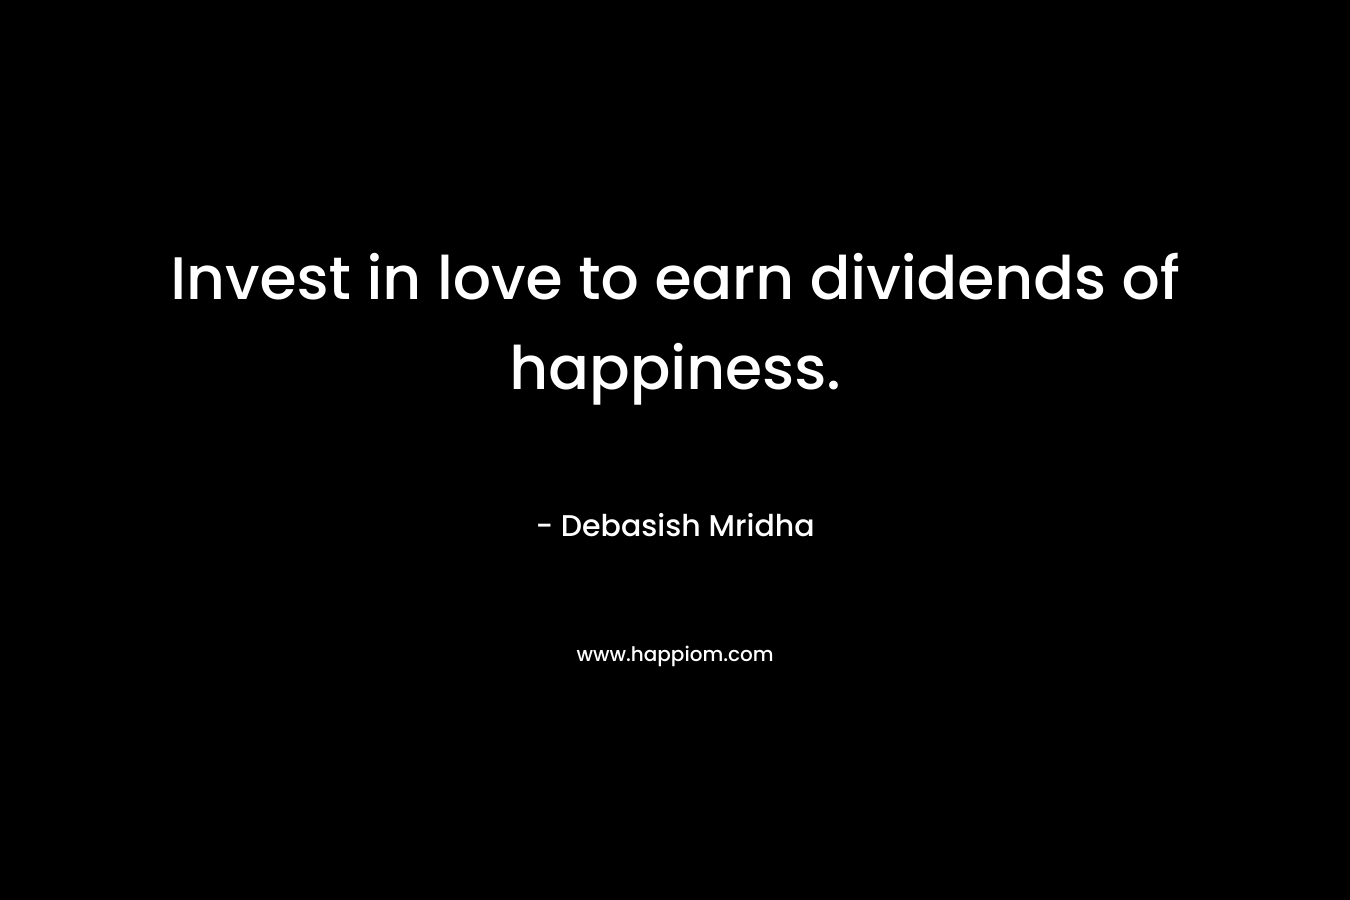 Invest in love to earn dividends of happiness. – Debasish Mridha